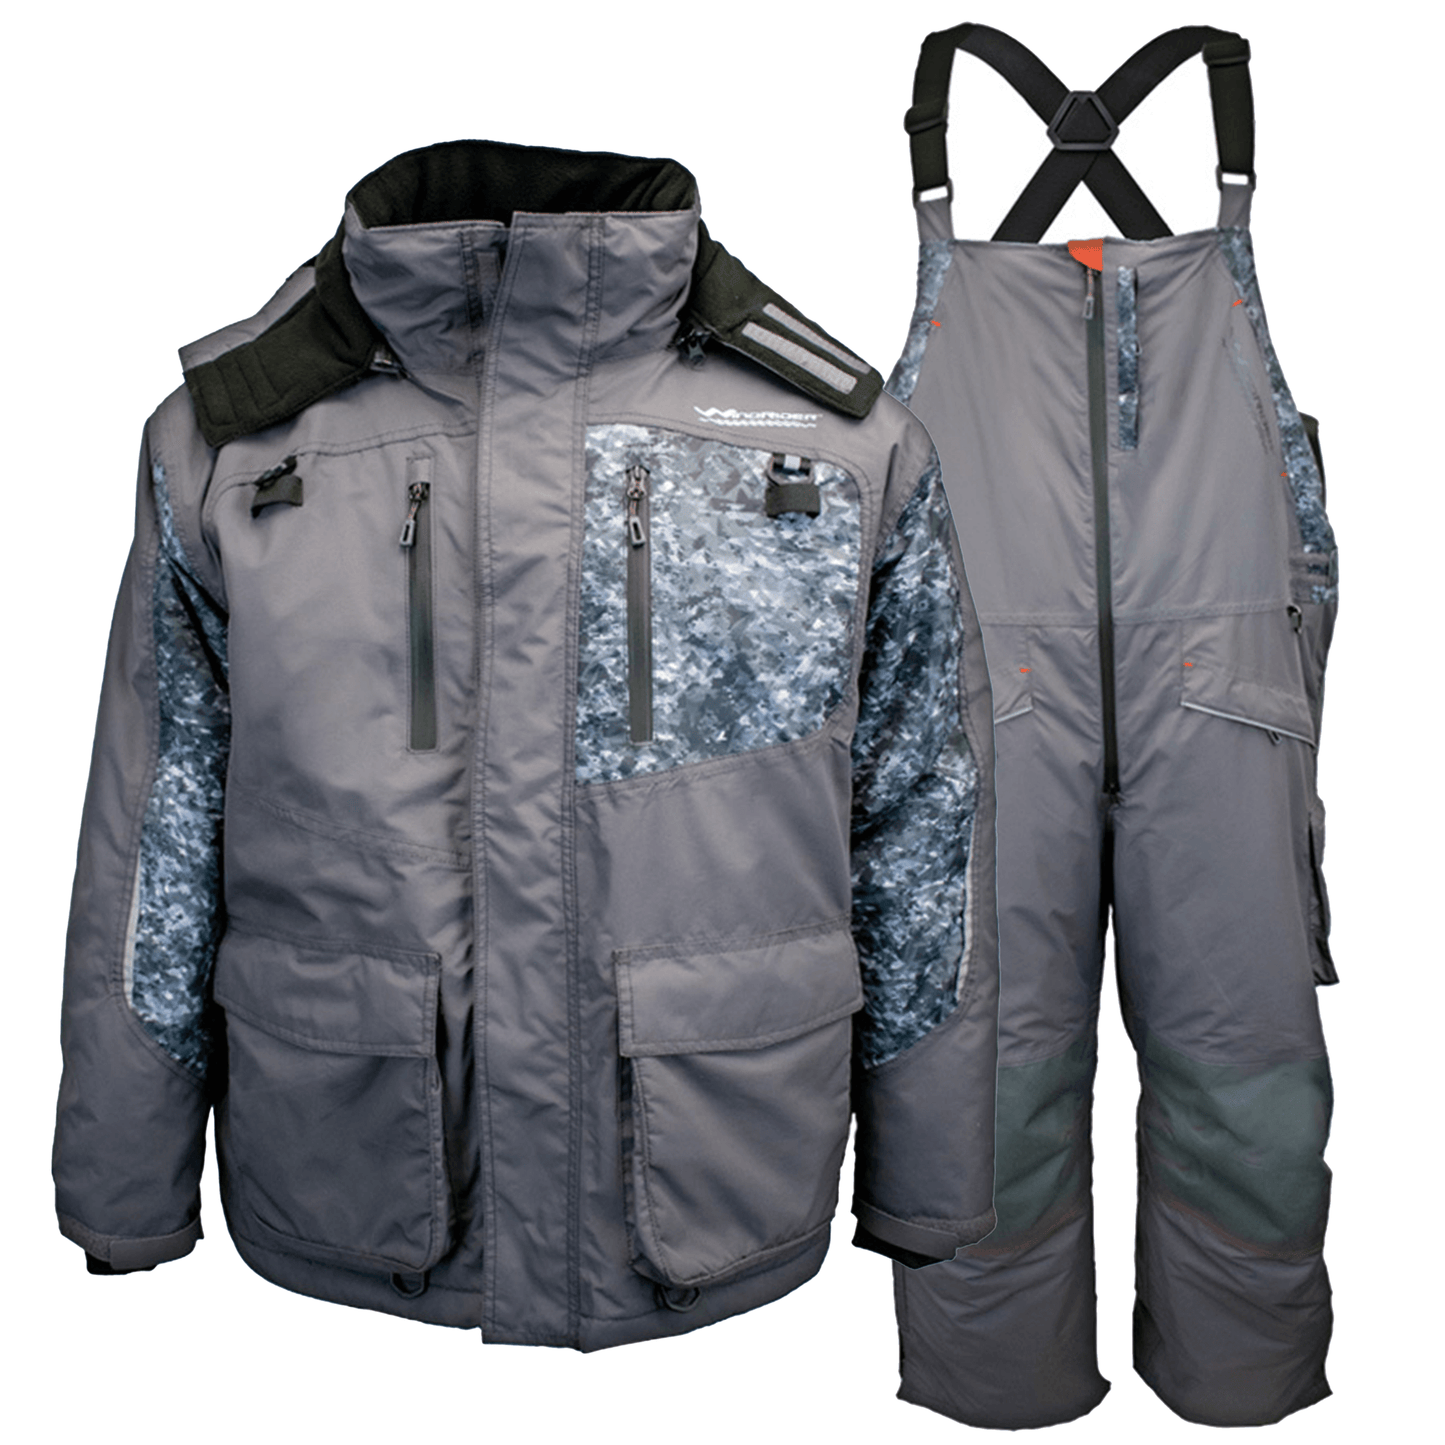 Best Cold Weather Gear For Fishing UK Outlet